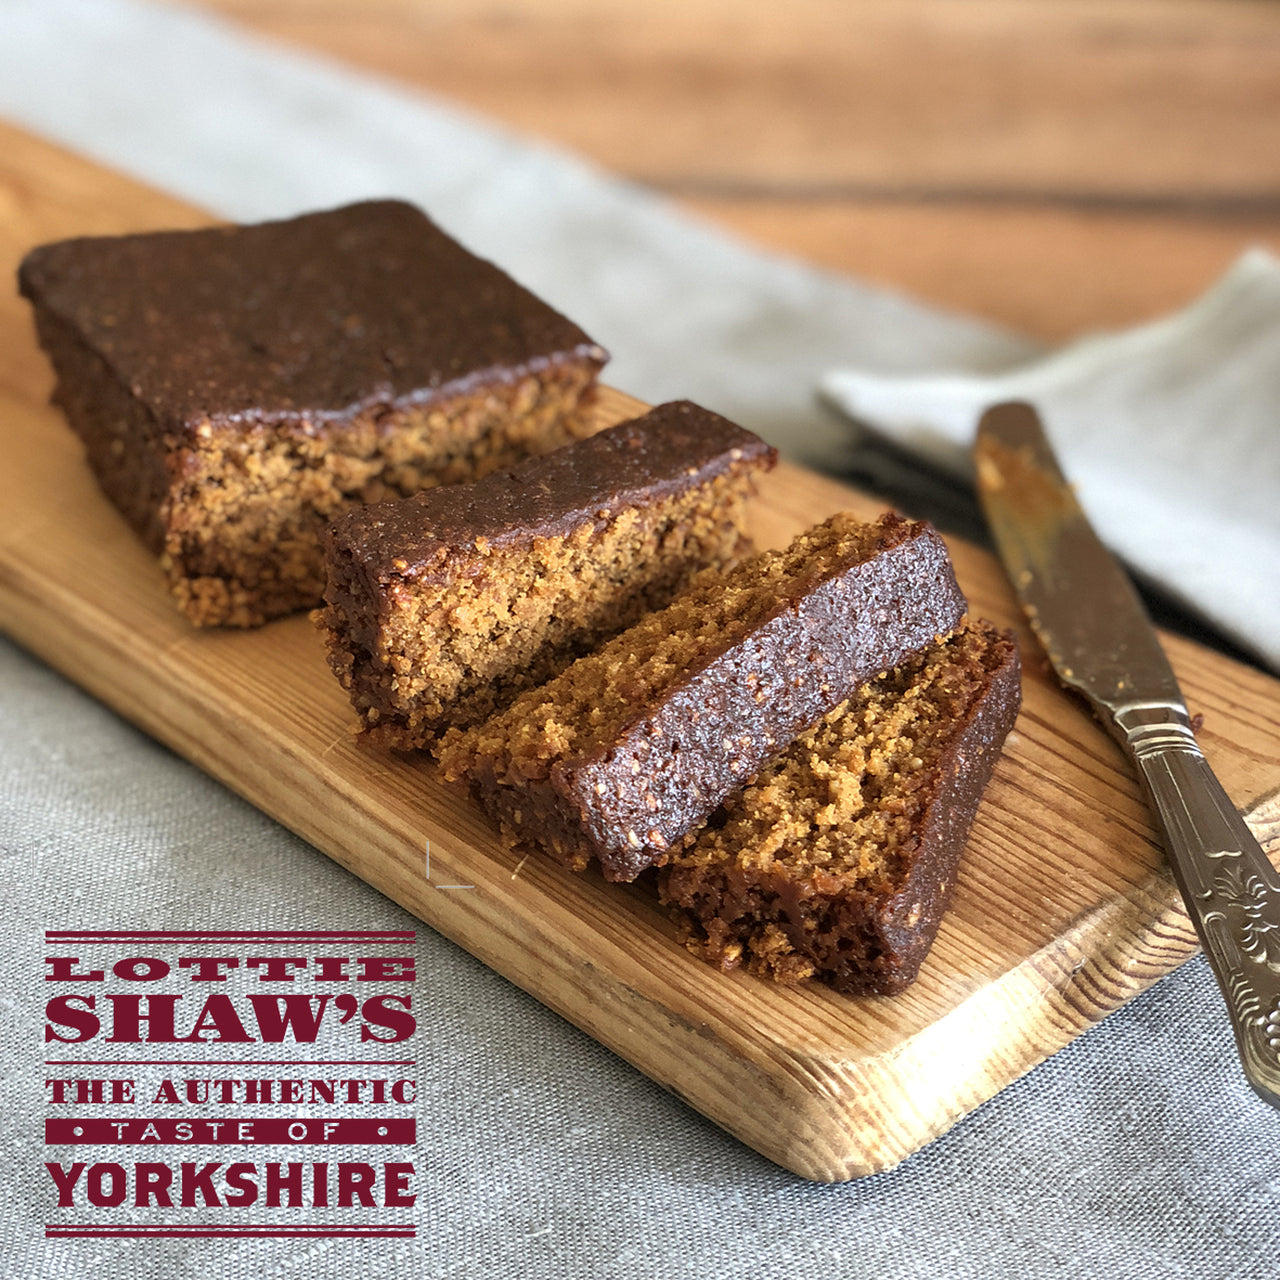 Lottie Shaw's seriously good parkin shown sliced on a cutting board.